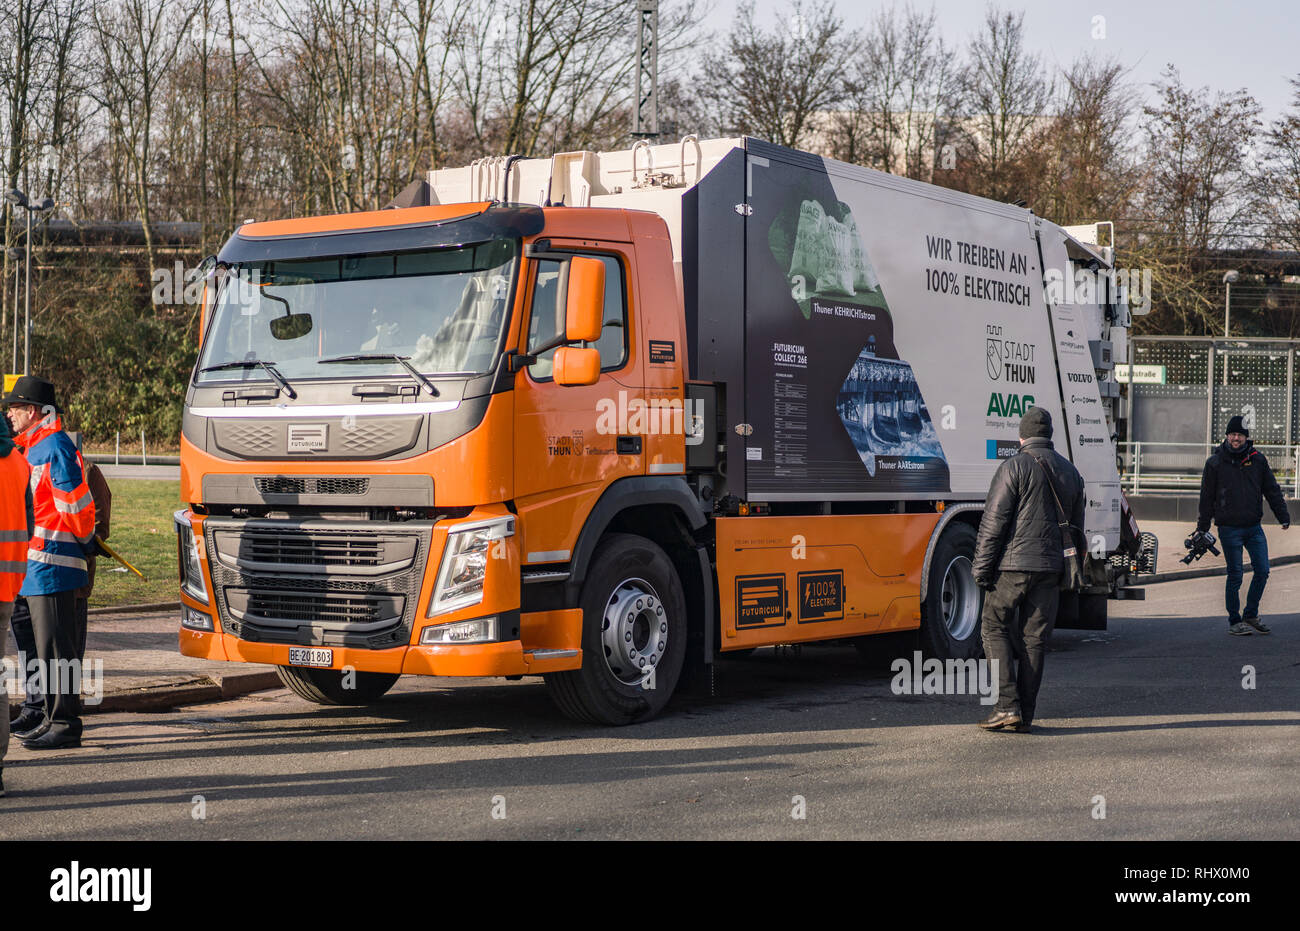 04 February 2019, Hessen, Frankfurt/M.: A fully electric refuse vehicle of  the type "Futuricum" of the Swiss company Designwerk Products stands during  a press demonstration on a street near the waste-to-energy plant.